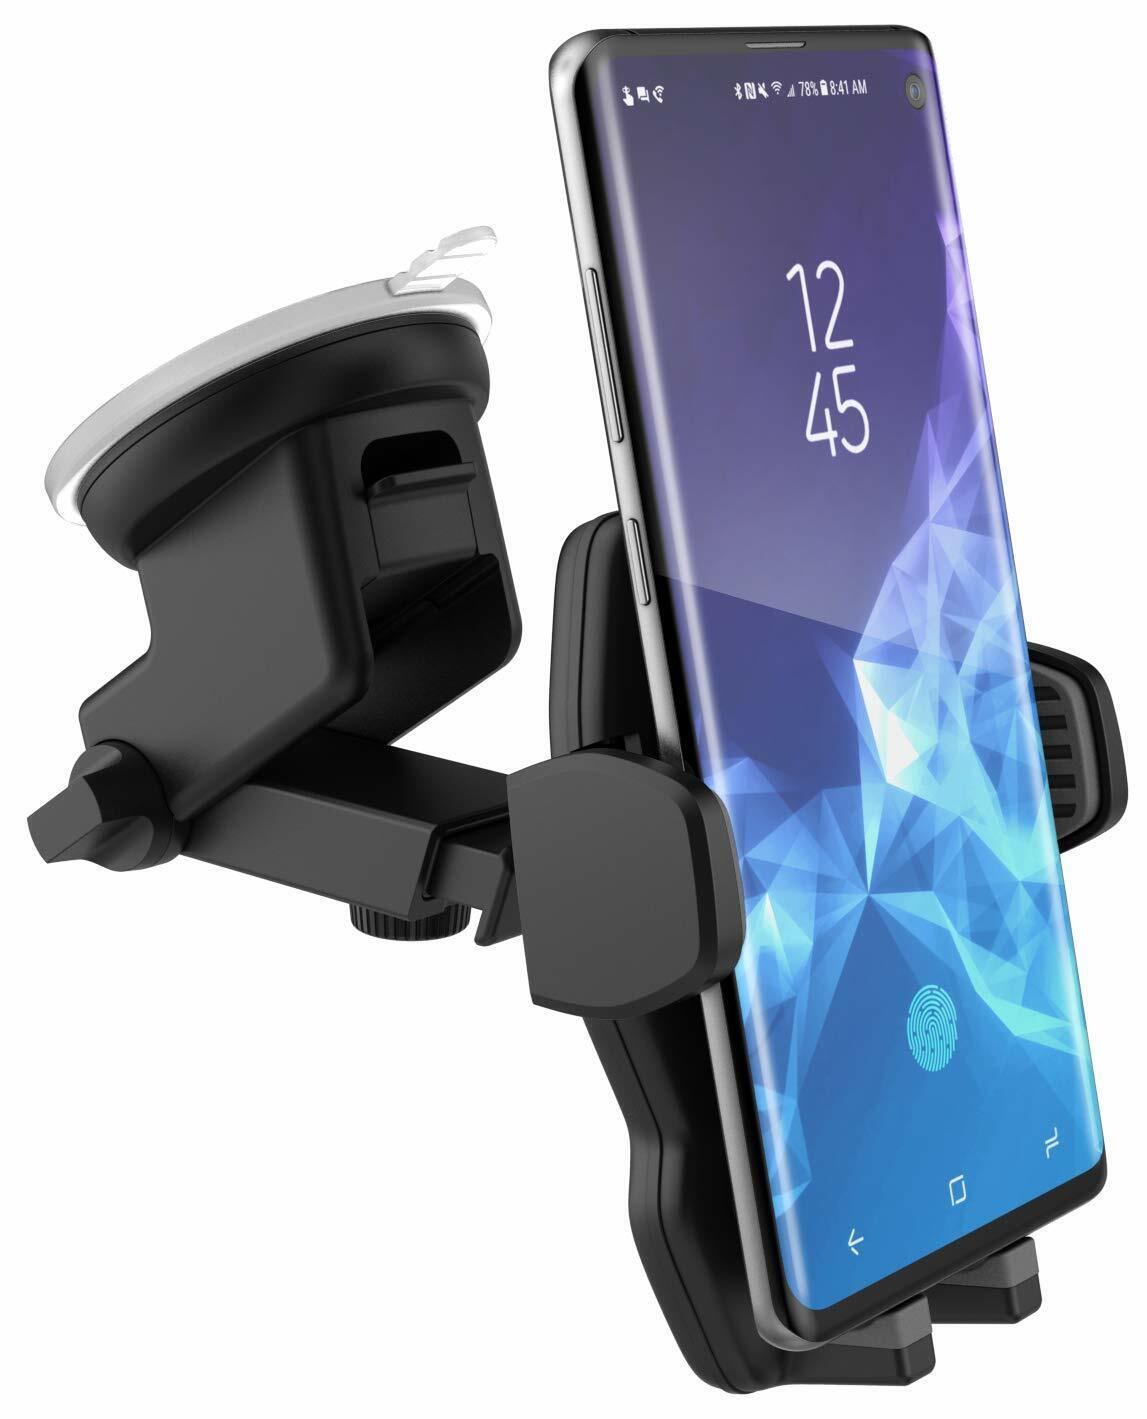 Primary image for E-Z Dock Car Mount for Samsung Galaxy S10, S10e,S10 Plus Phone Holder By ENCASED